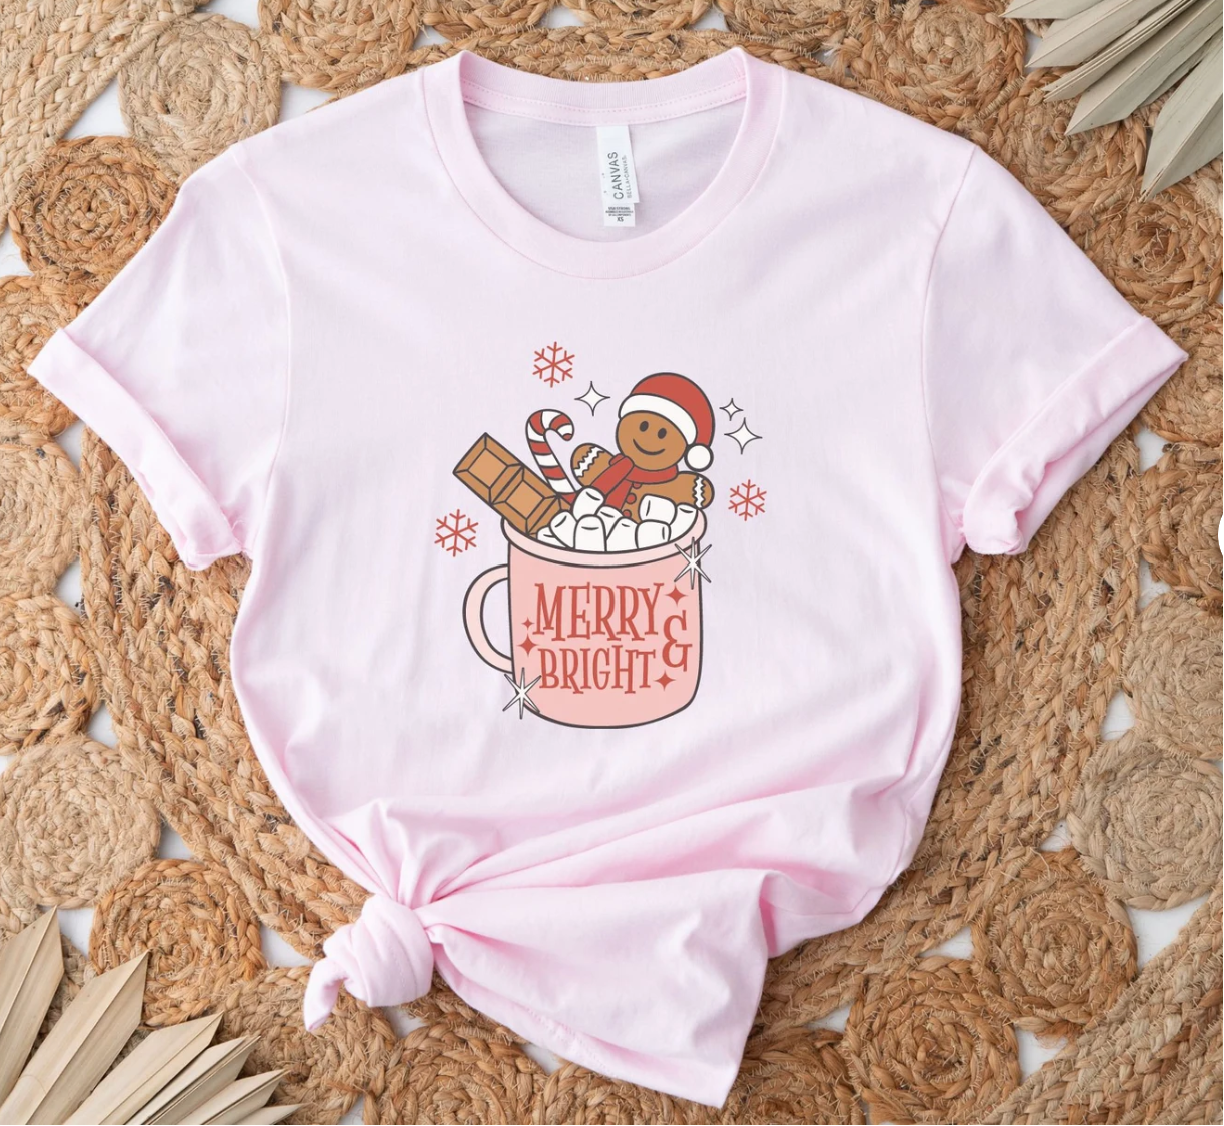 Merry & Bright, Gingerbread Holiday Tee